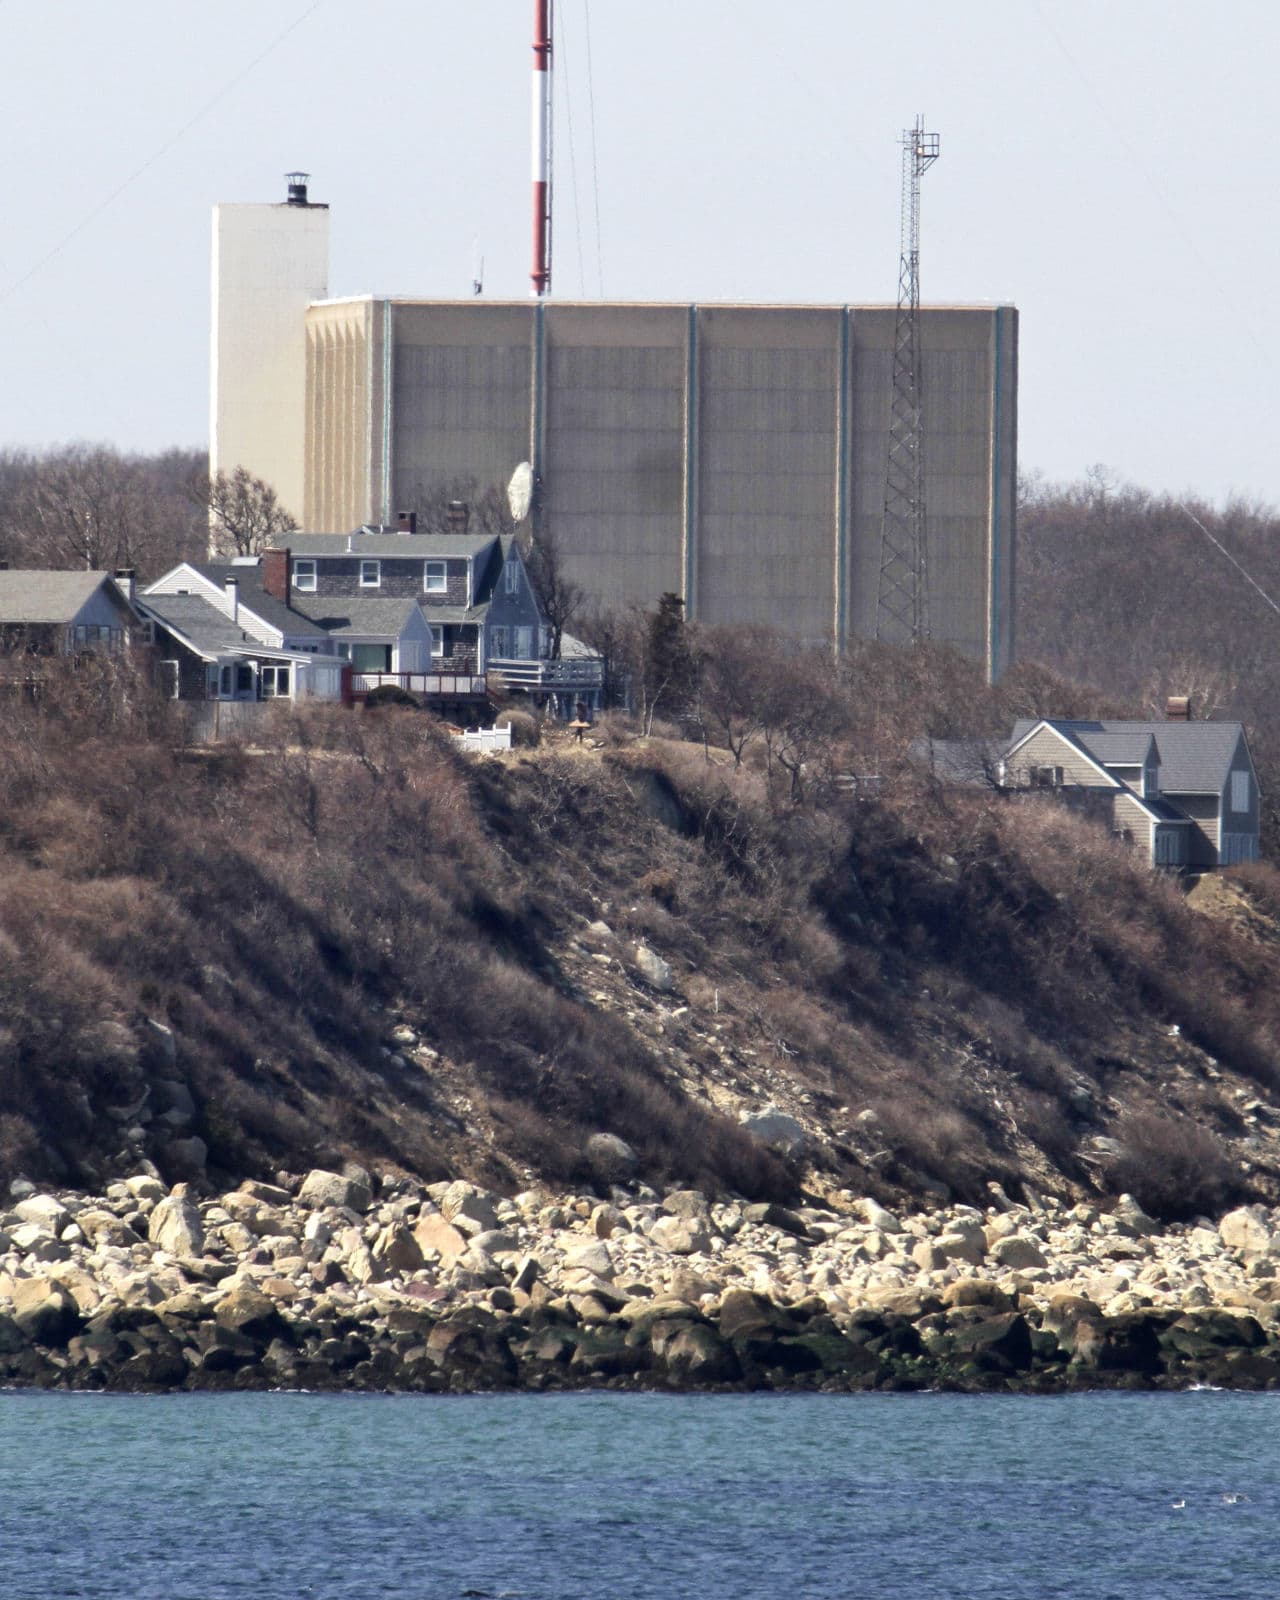 A tower at Pilgrim Nuclear Power Station in Plymouth is seen near the coast of Cape Cod Bay in 2011. (Steven Senne/AP)